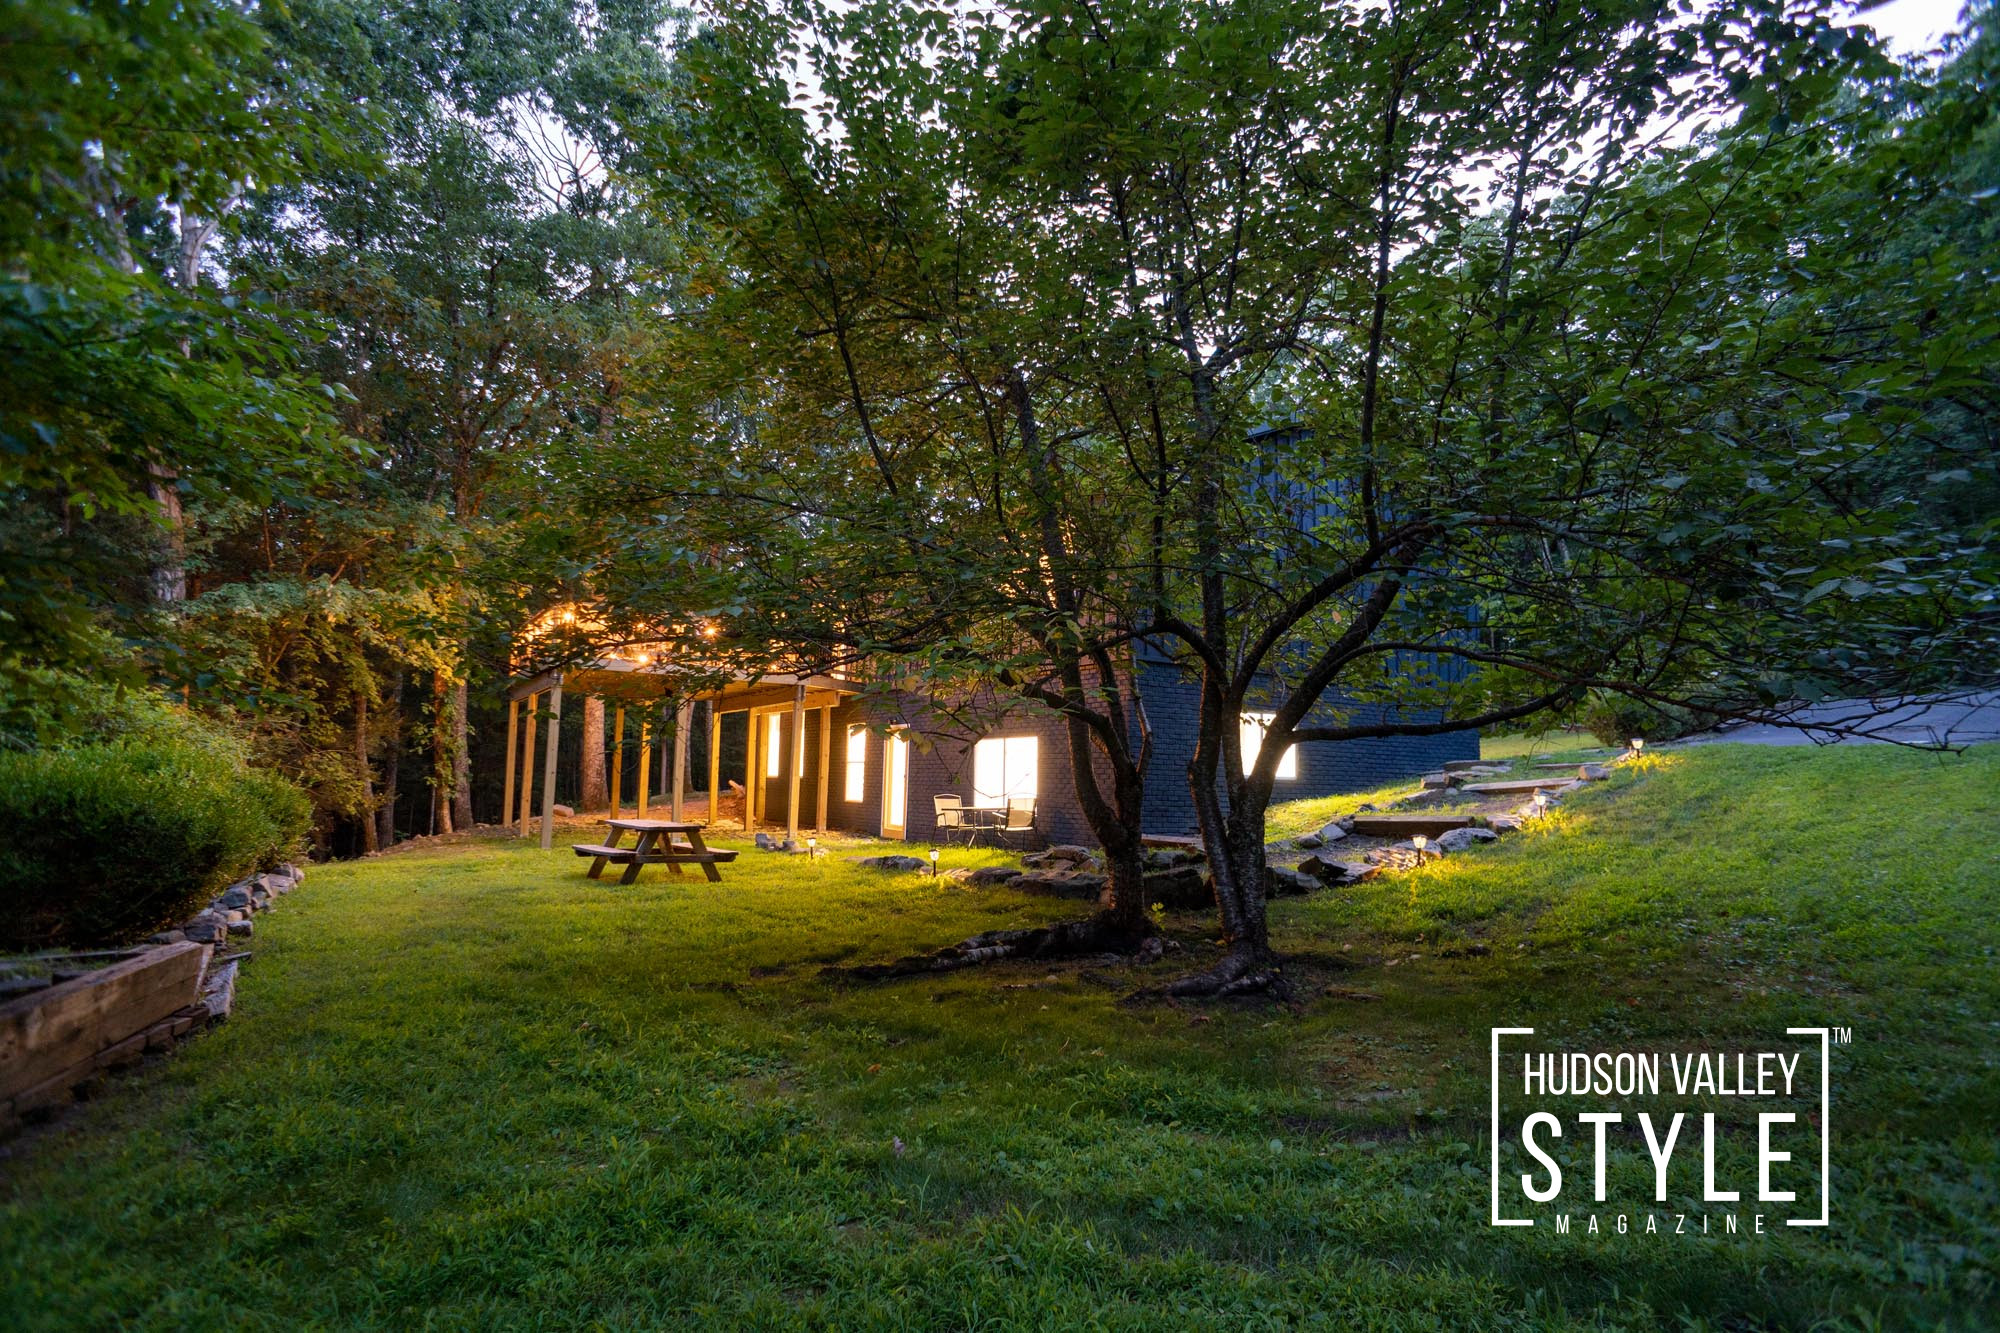 Good Vibes Only: Airbnb Review of an Upstate Airbnb Listing by Photographer Maxwell Alexander – Airbnb Photography for Duncan Avenue Studios (NYC) + Alluvion Media (Hudson Valley) – Dusk Photography – Twilight Photography – Editorial and Lifestyle Photography